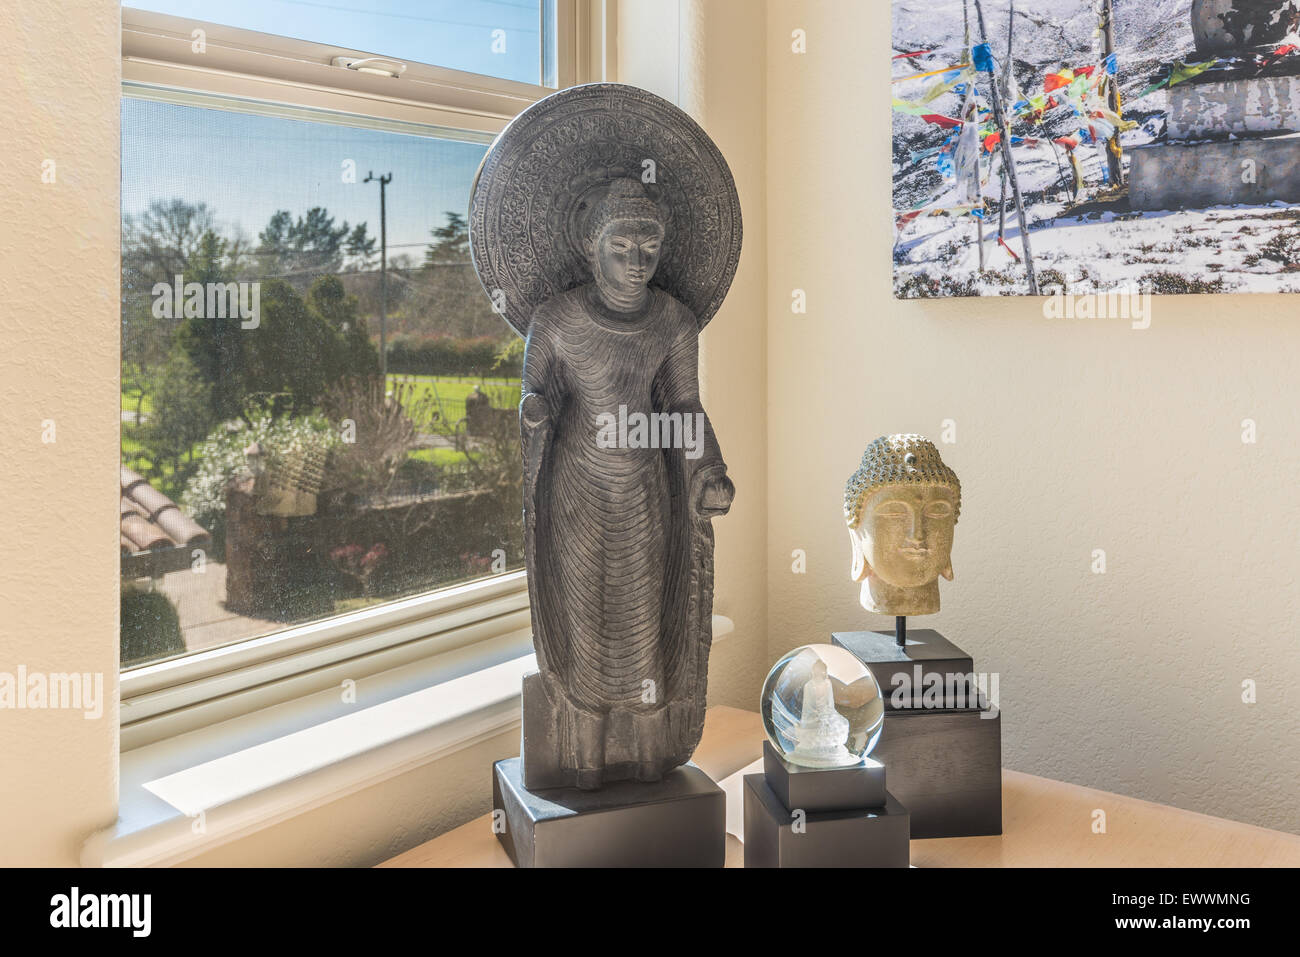 Buddhist figures backlit by window in Sonoma, California Stock Photo